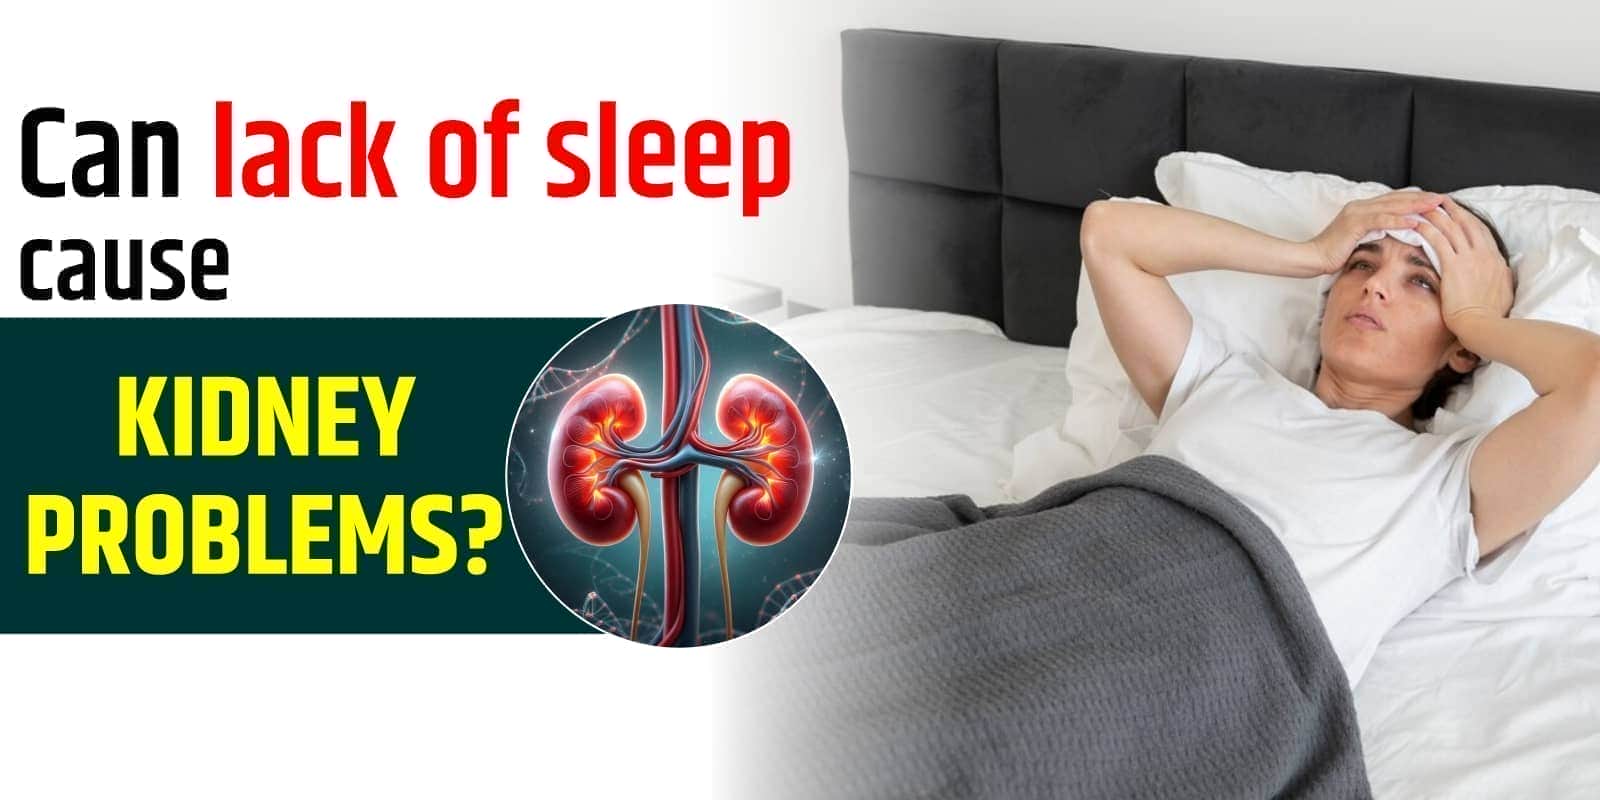 Can lack of sleep cause kidney problems?